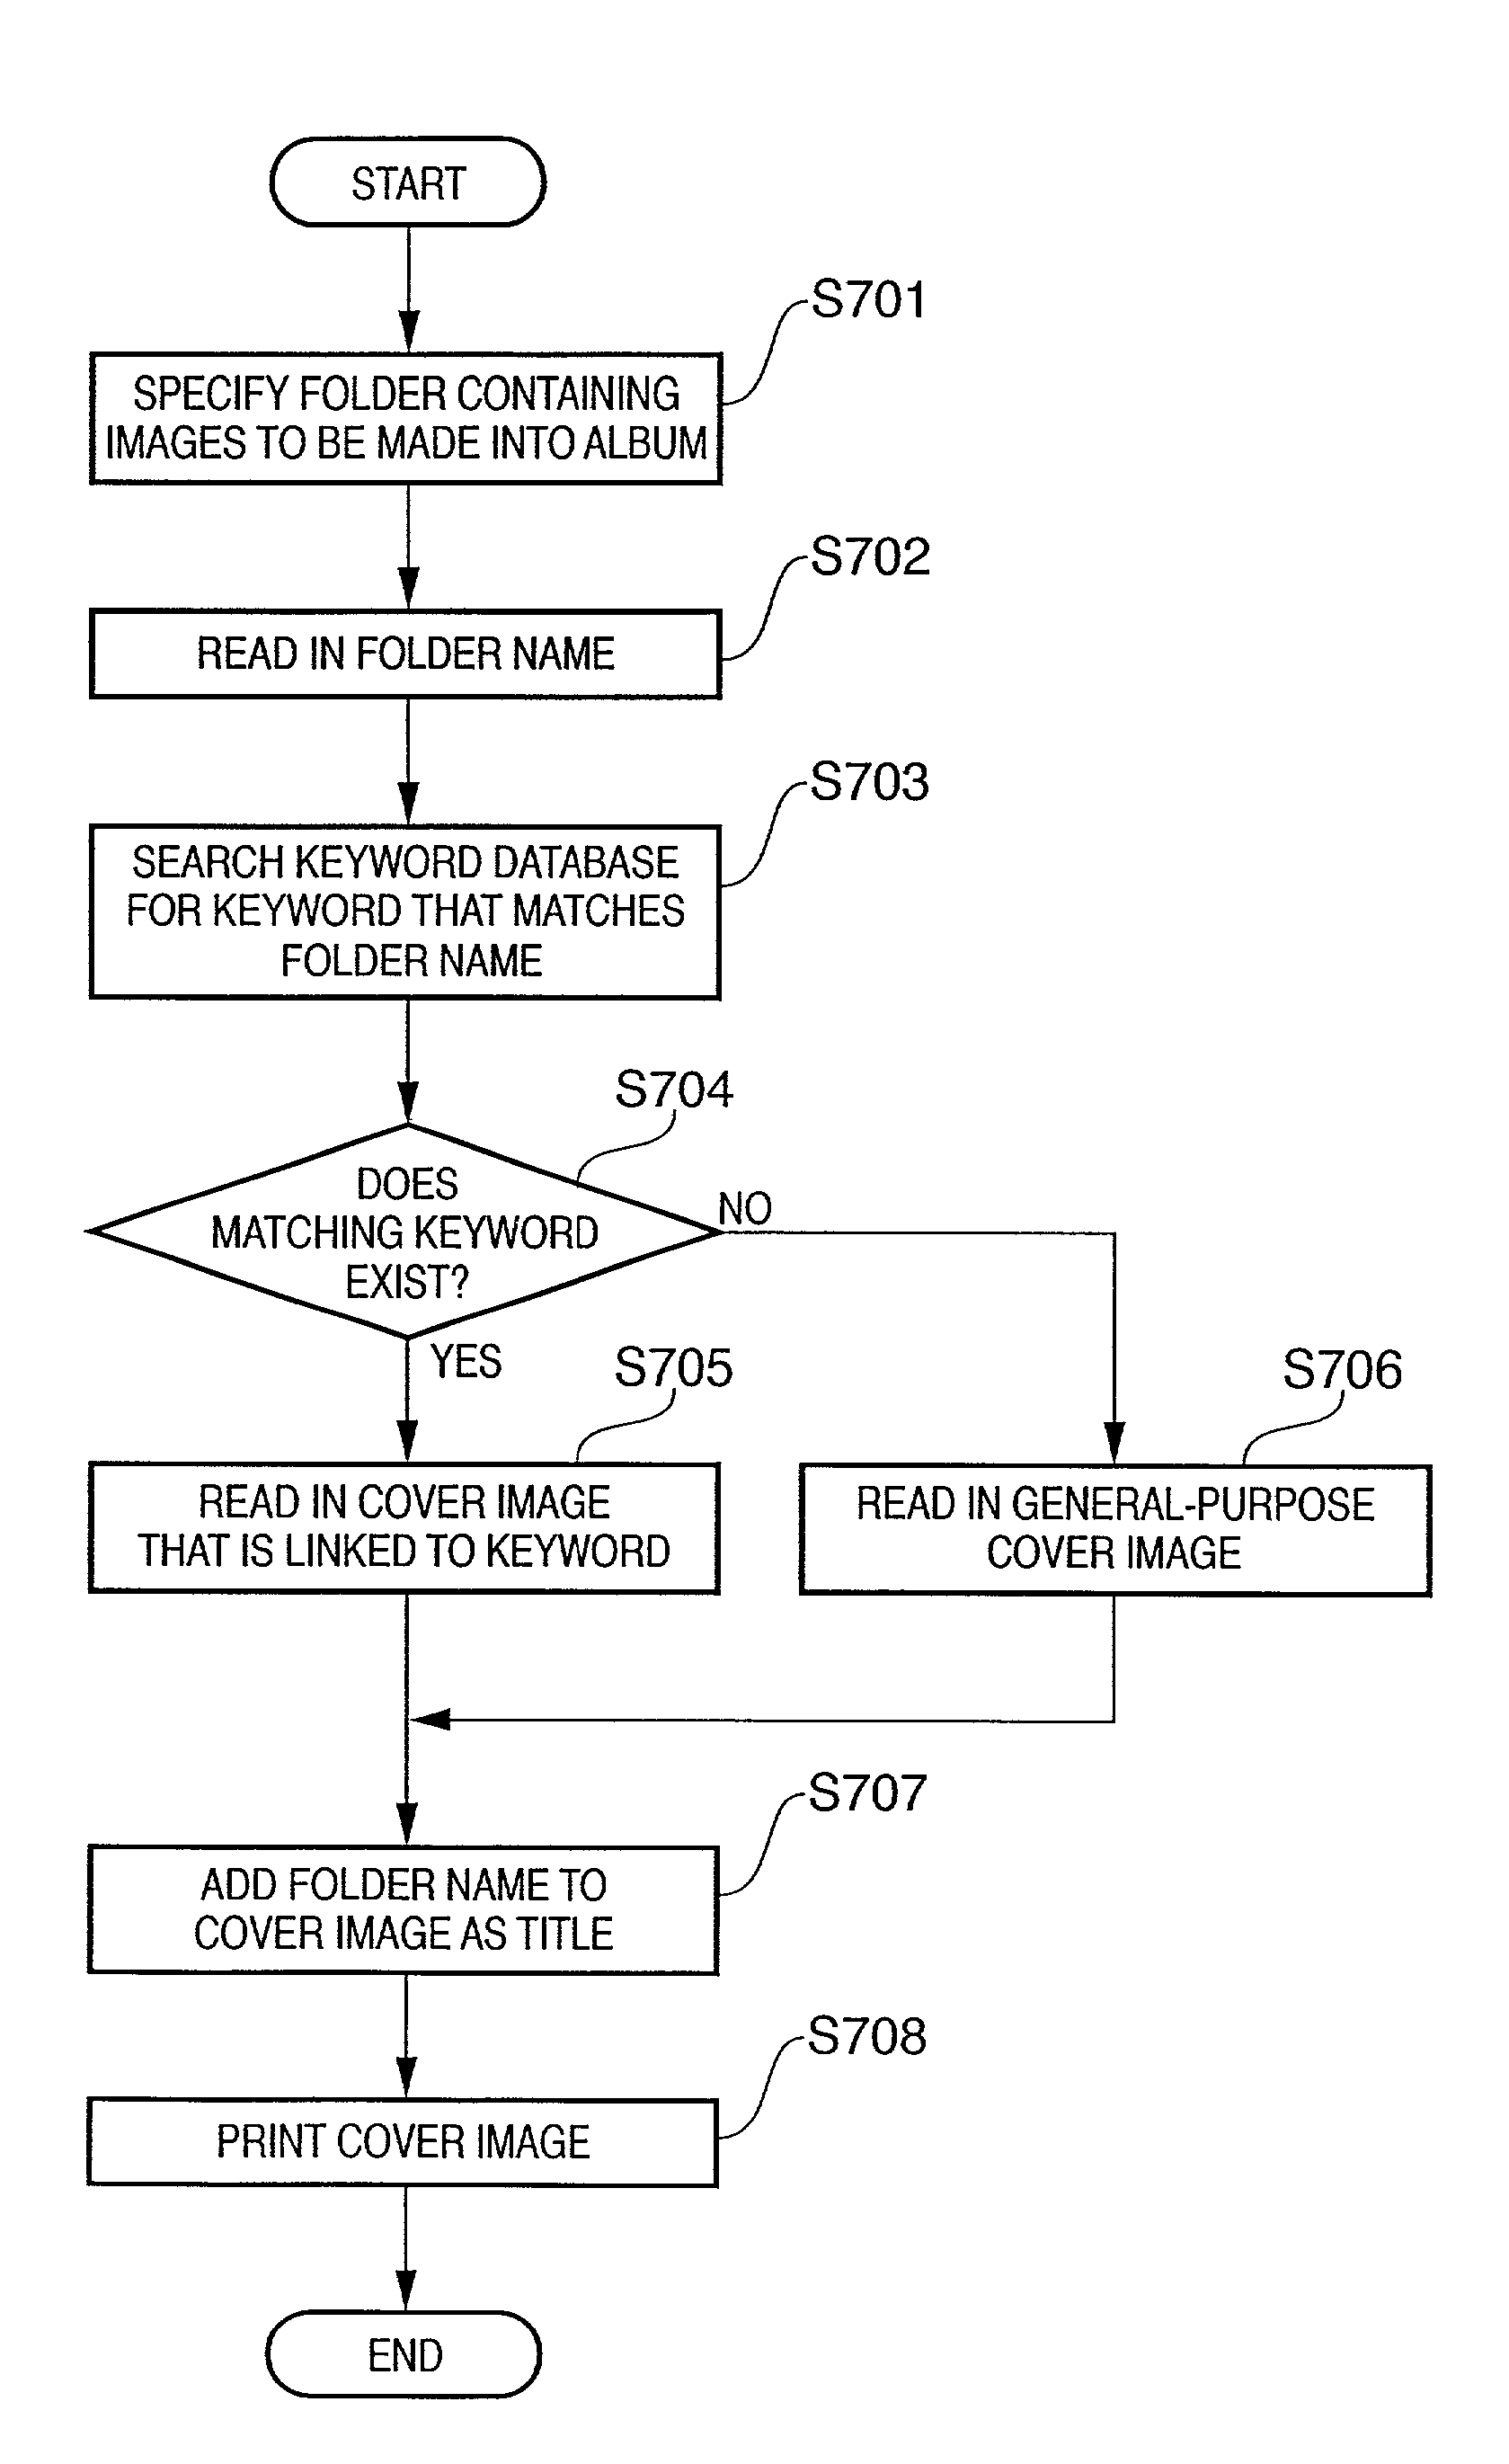 Image processing apparatus and method utilized to generate cover image